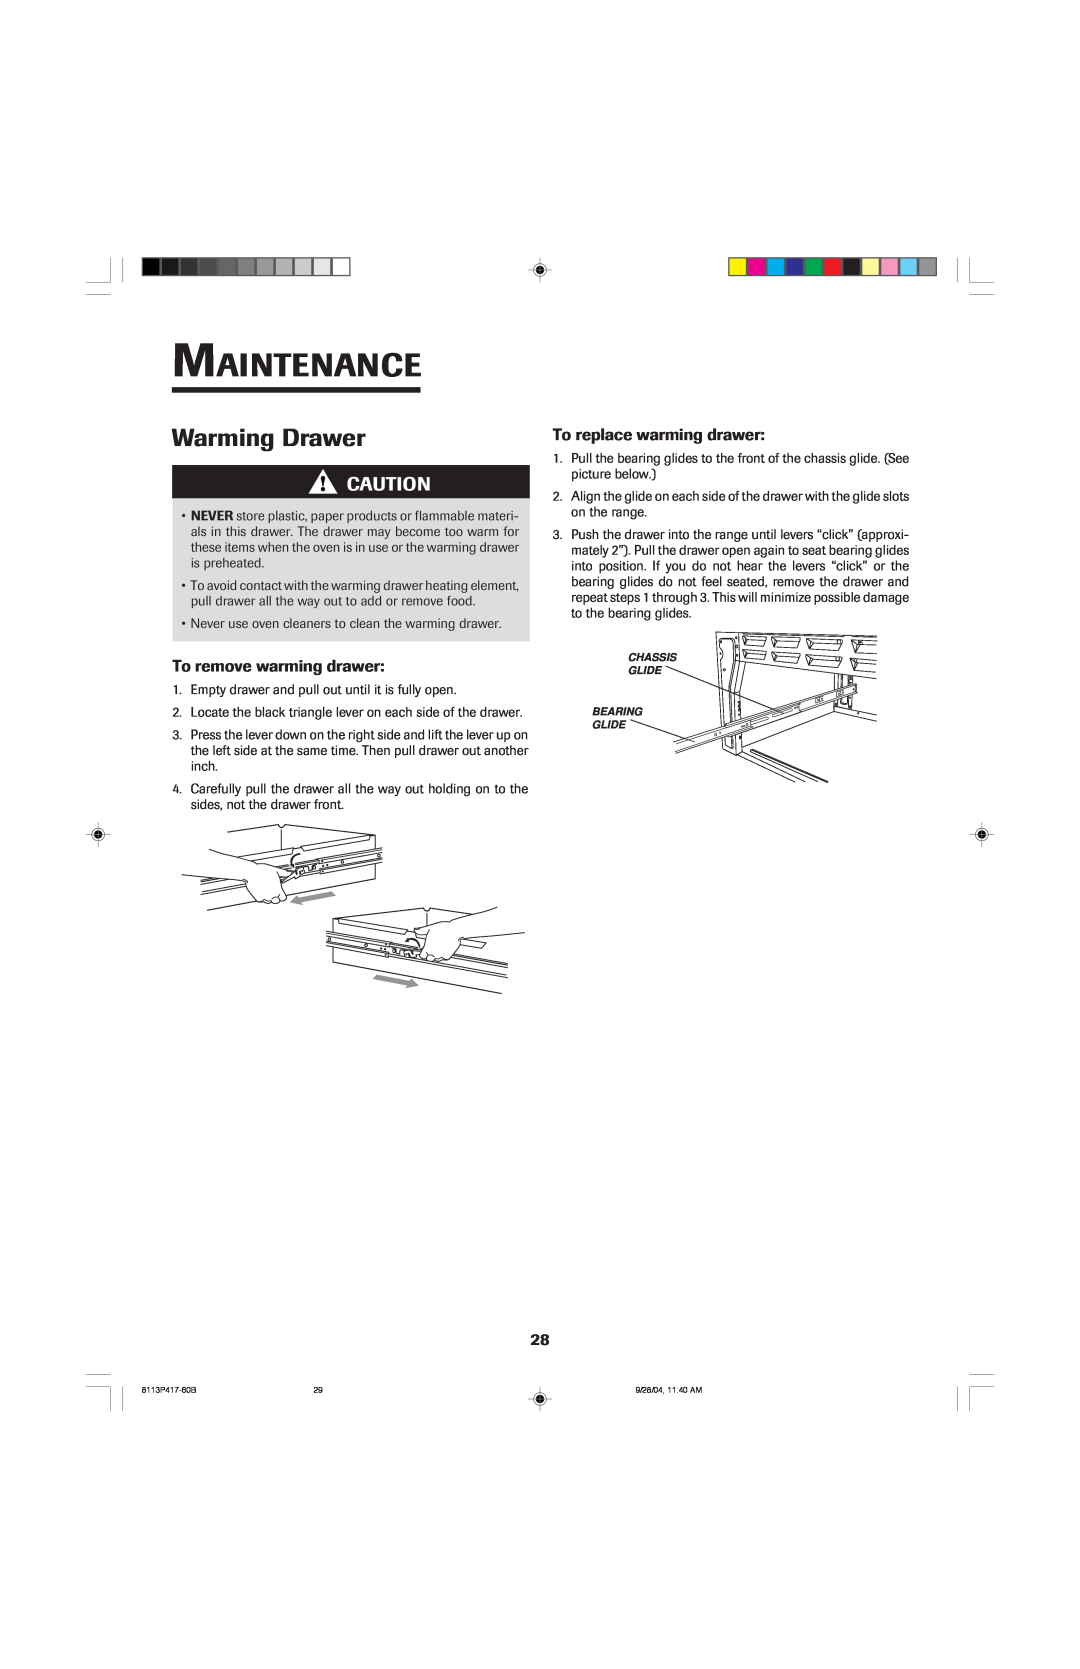 Jenn-Air 800 To remove warming drawer, To replace warming drawer, Maintenance, Warming Drawer, Chassis Glide 